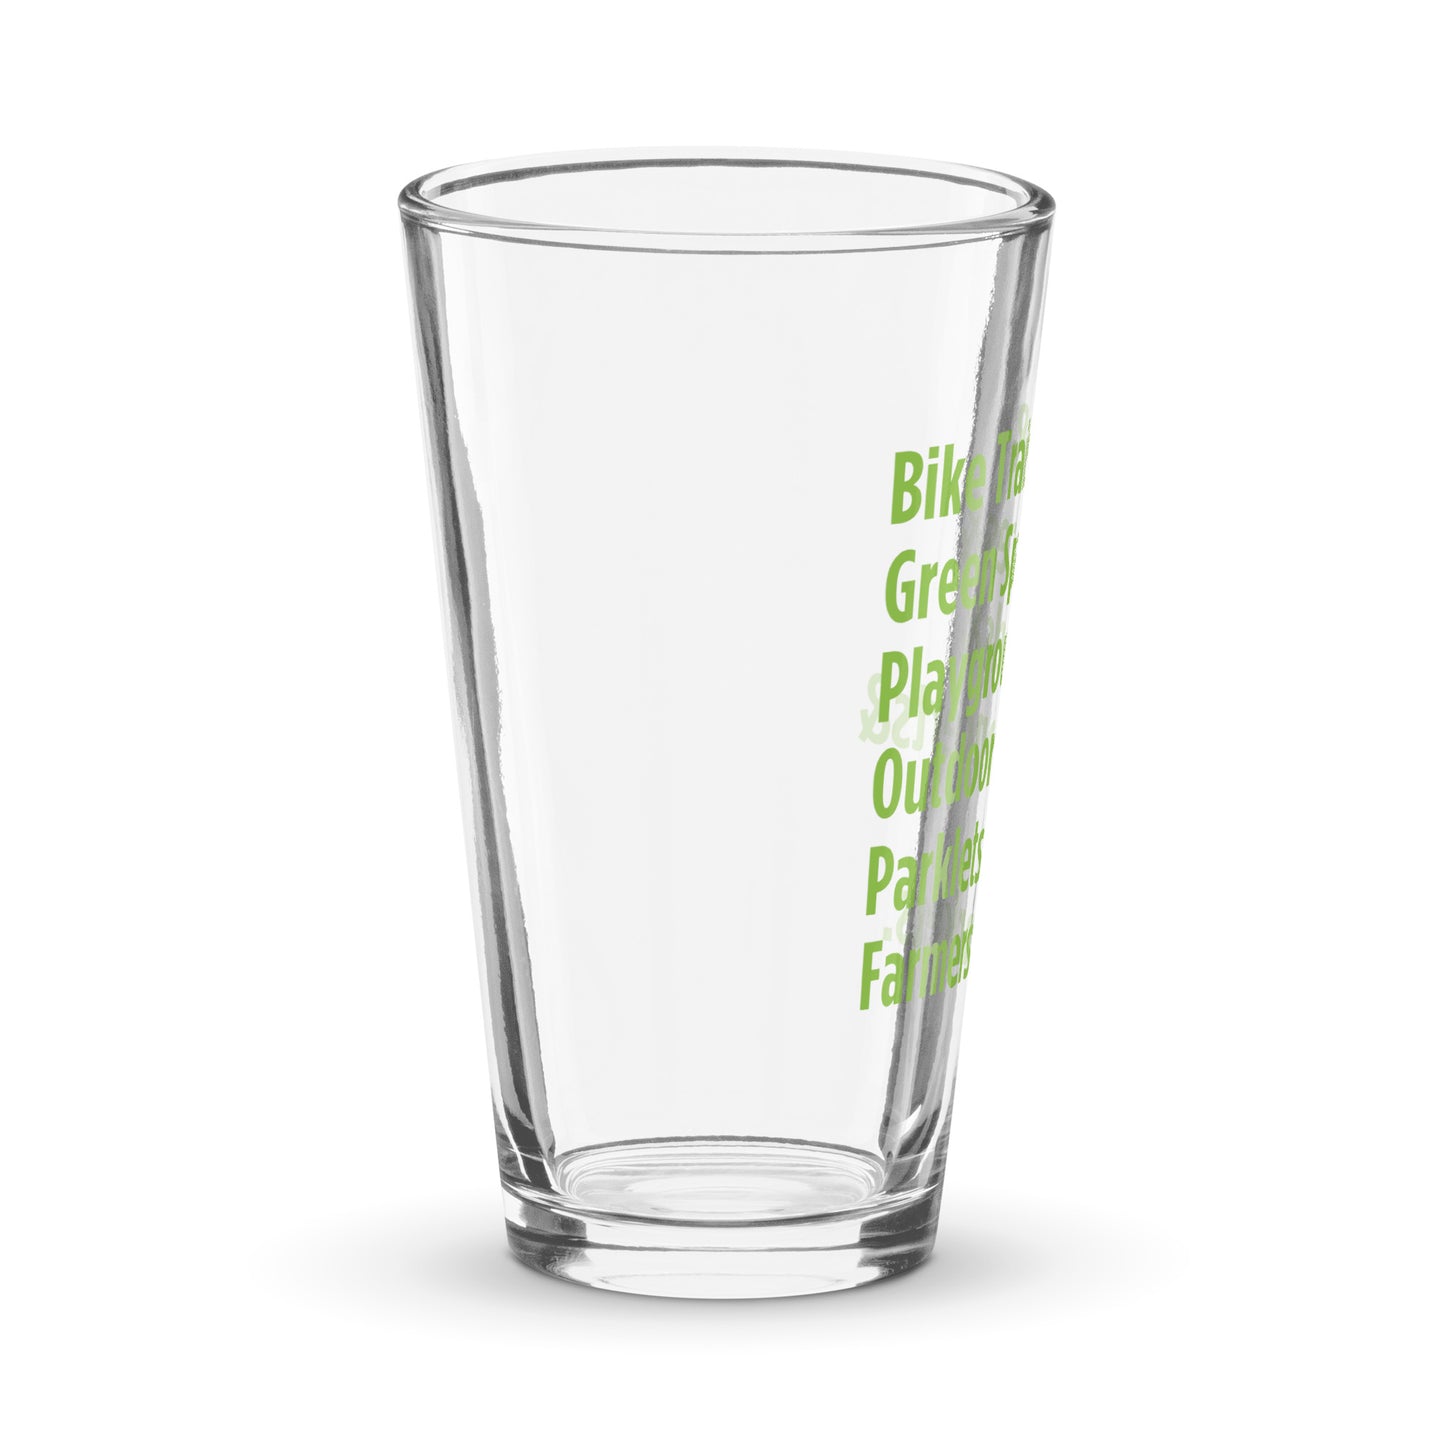 "Only on Main Street" (Greenspaces) Shaker Pint Glass